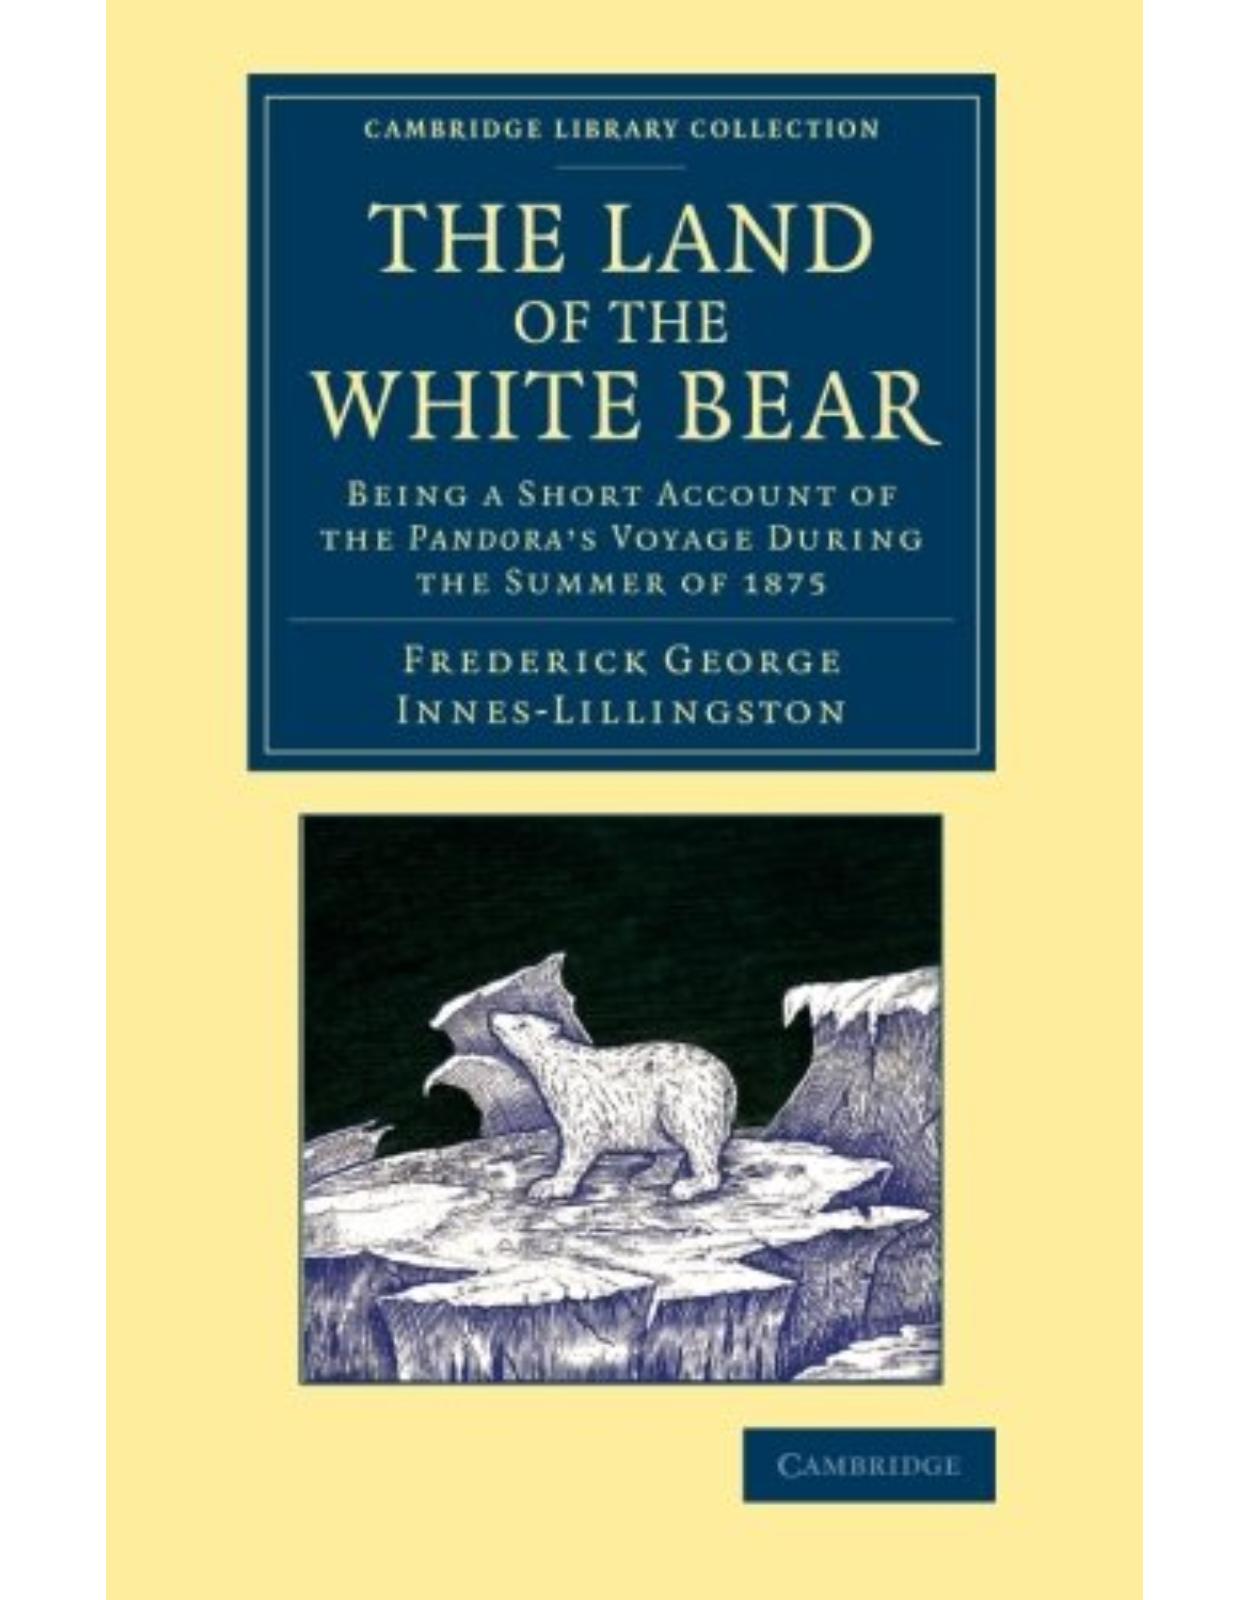 The Land of the White Bear: Being a Short Account of the Pandora's Voyage during the Summer of 1875 (Cambridge Library Collection - Polar Exploration)